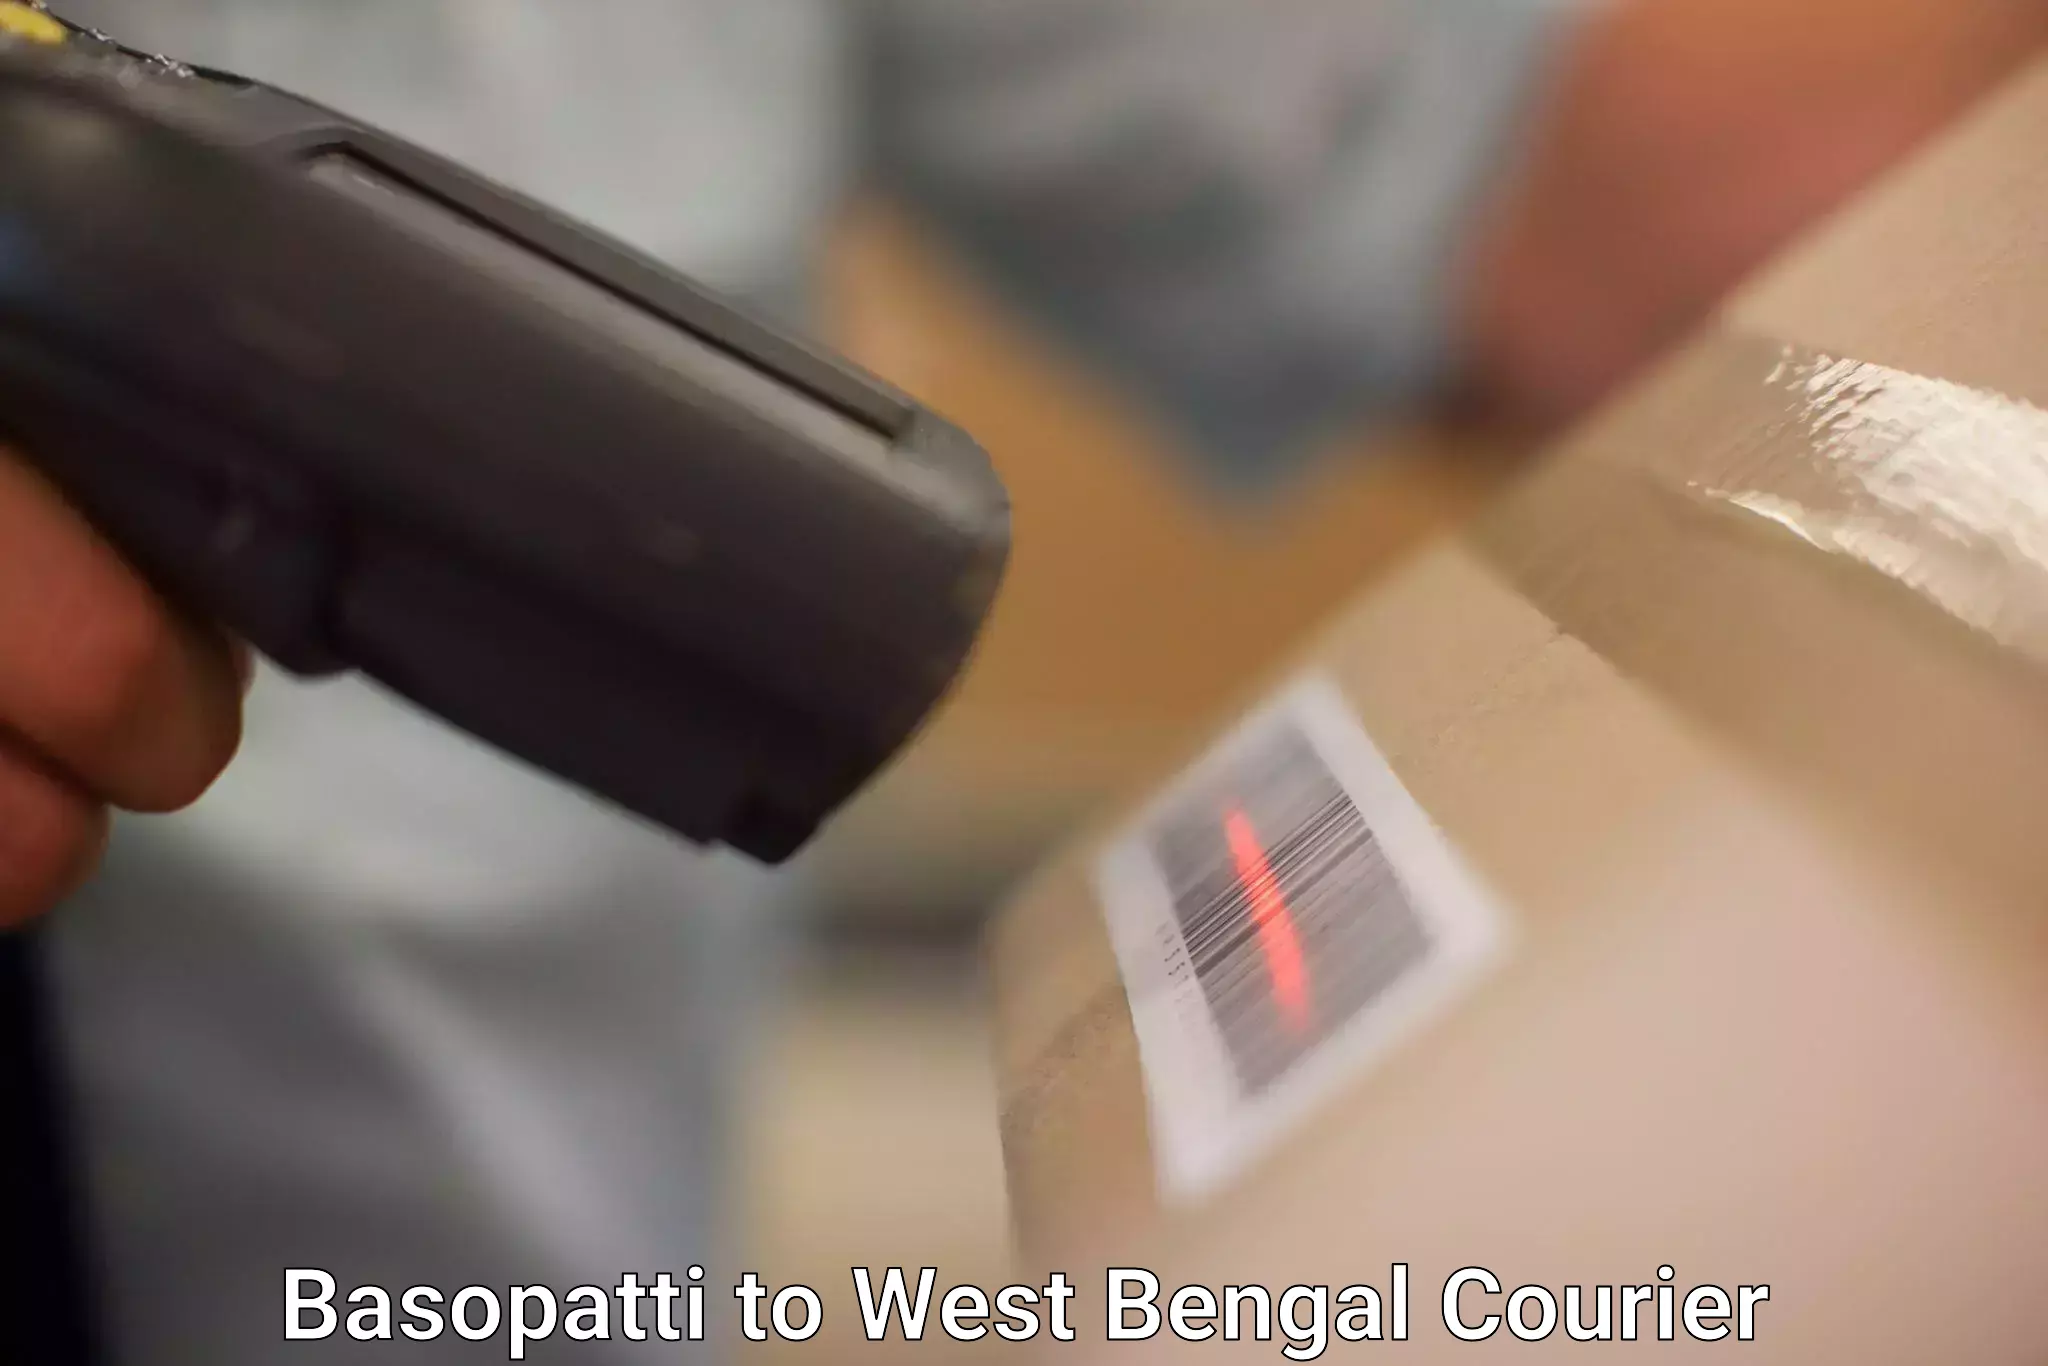 Courier service innovation Basopatti to West Bengal